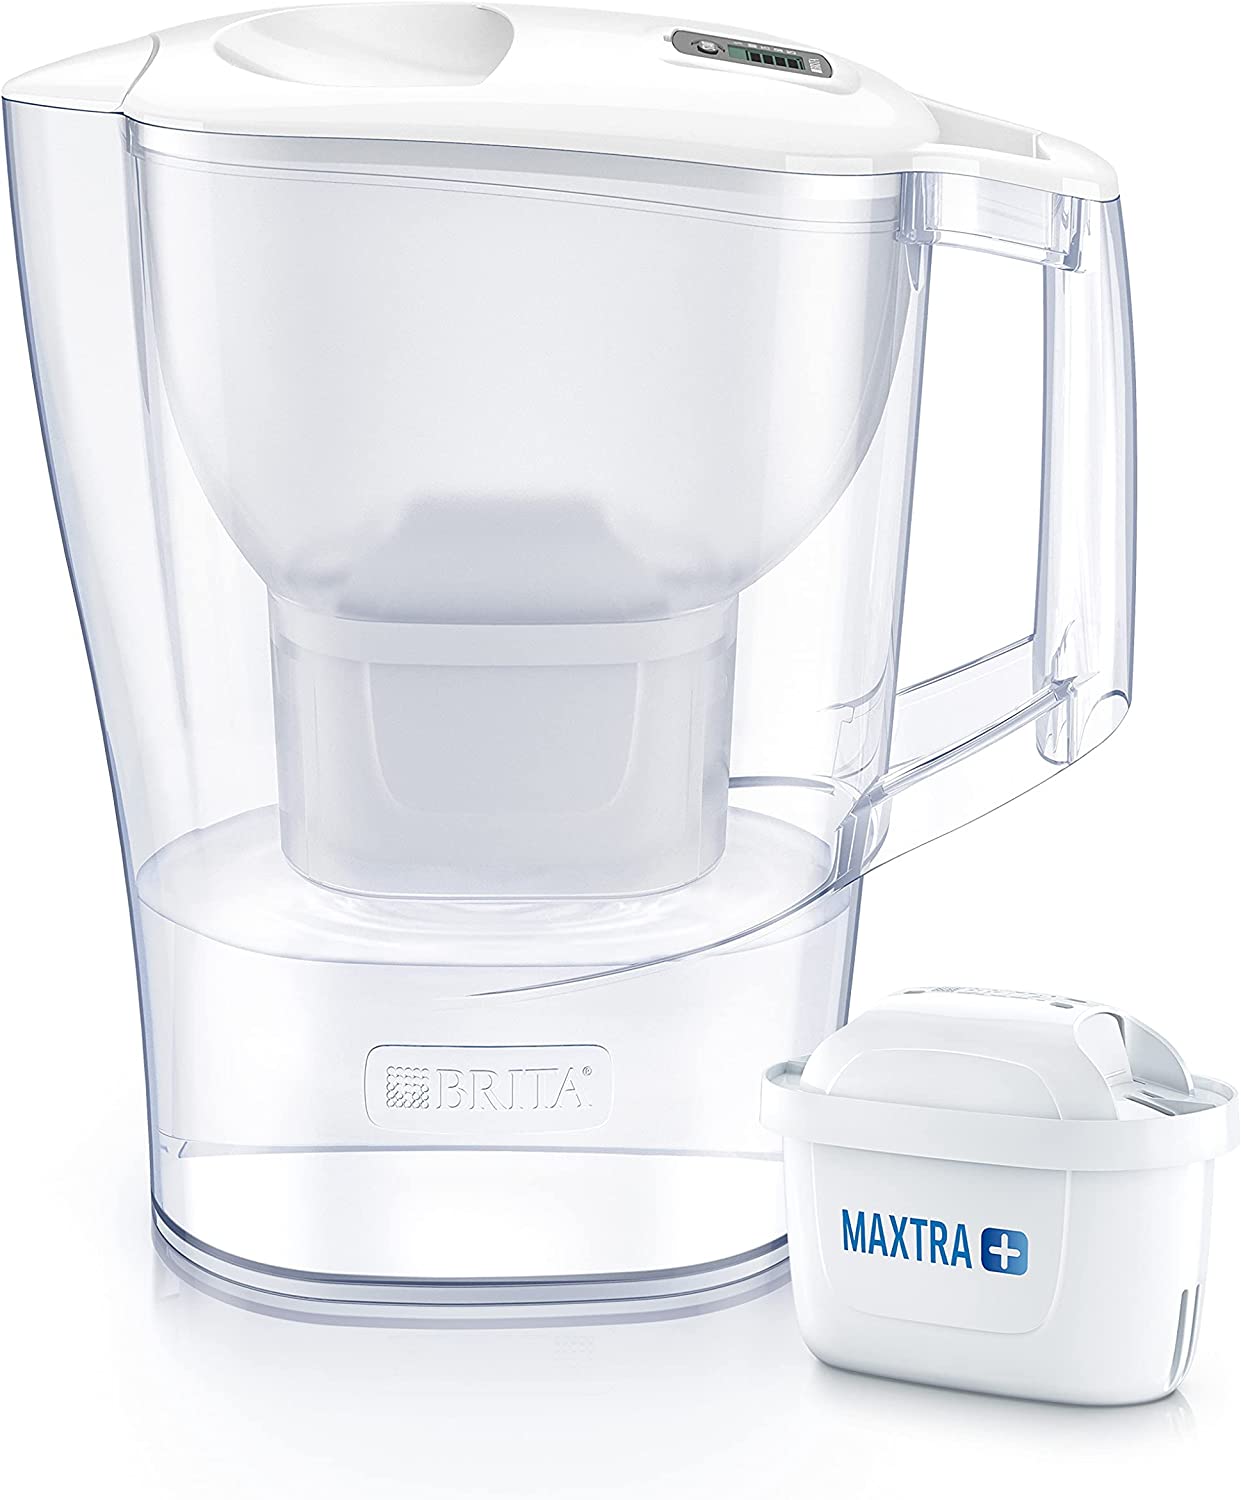 BRITA S0500 Aluna Fridge Water Filter jug for Reduction of Chlorine, limescale and Impuities, White, 2.4 L